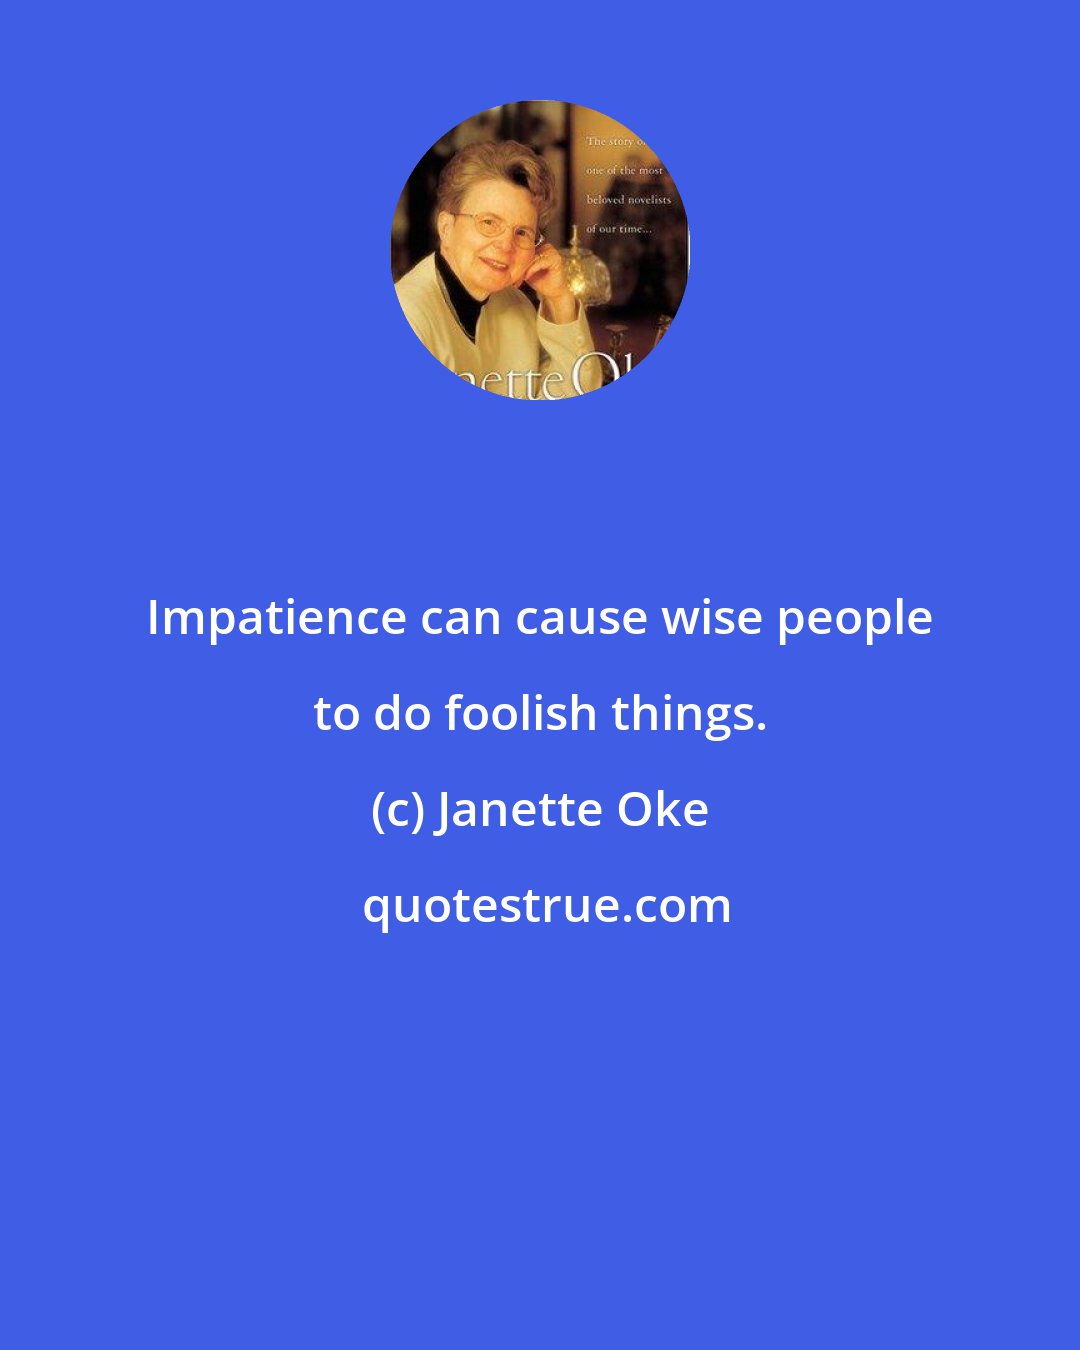 Janette Oke: Impatience can cause wise people to do foolish things.